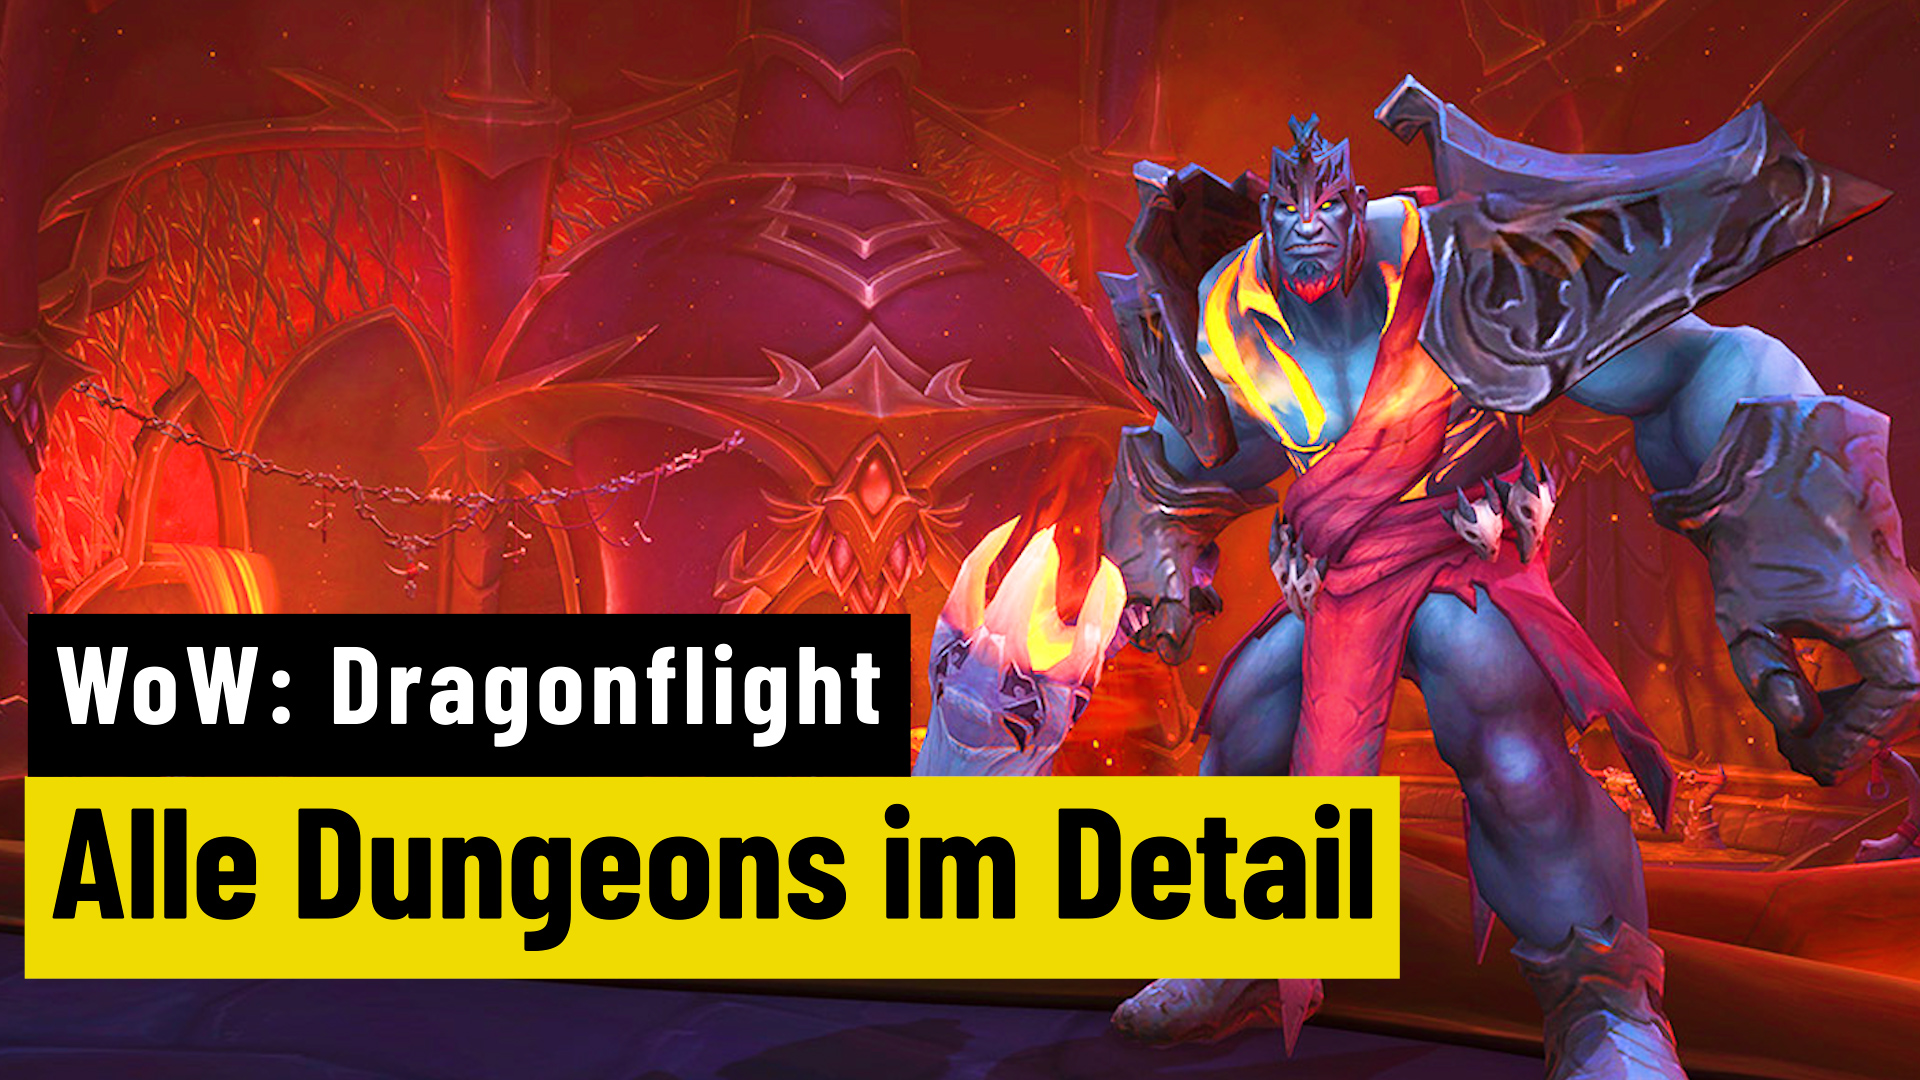 WoW: Dragonflight: The Dungeons of Dragonflight